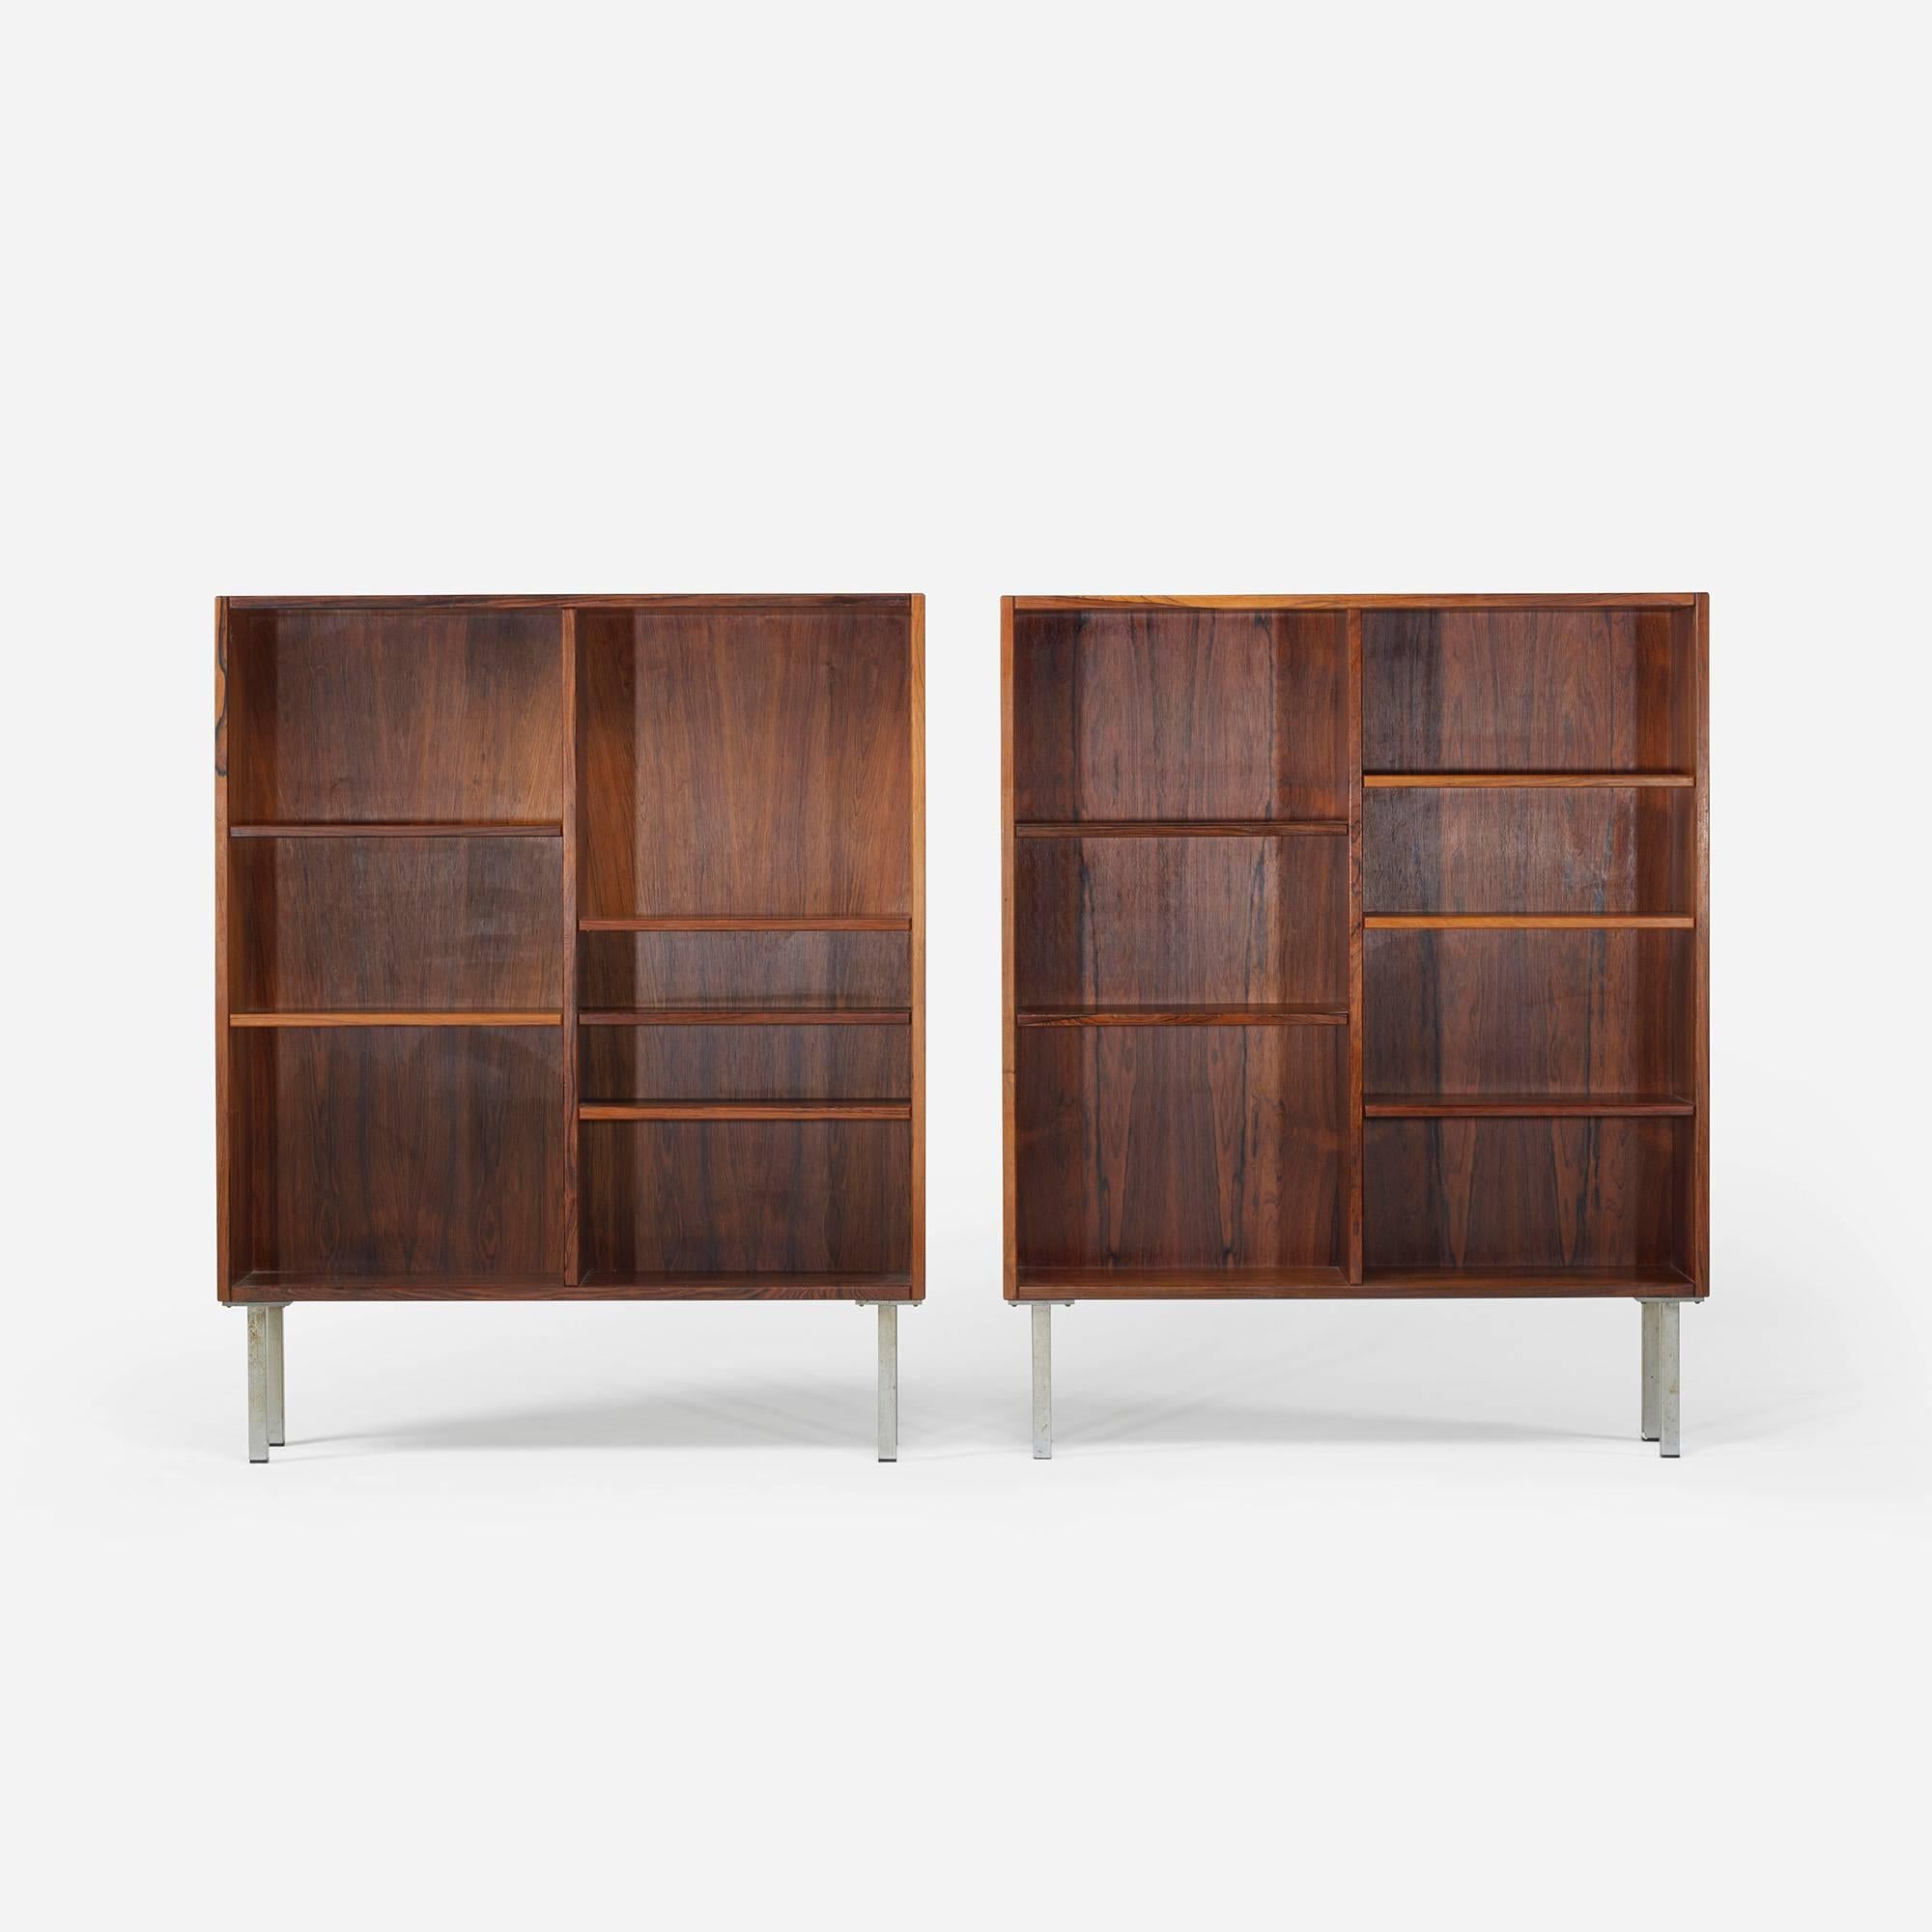 Each bookcase features five adjustable shelves that can be configured in numerous ways.